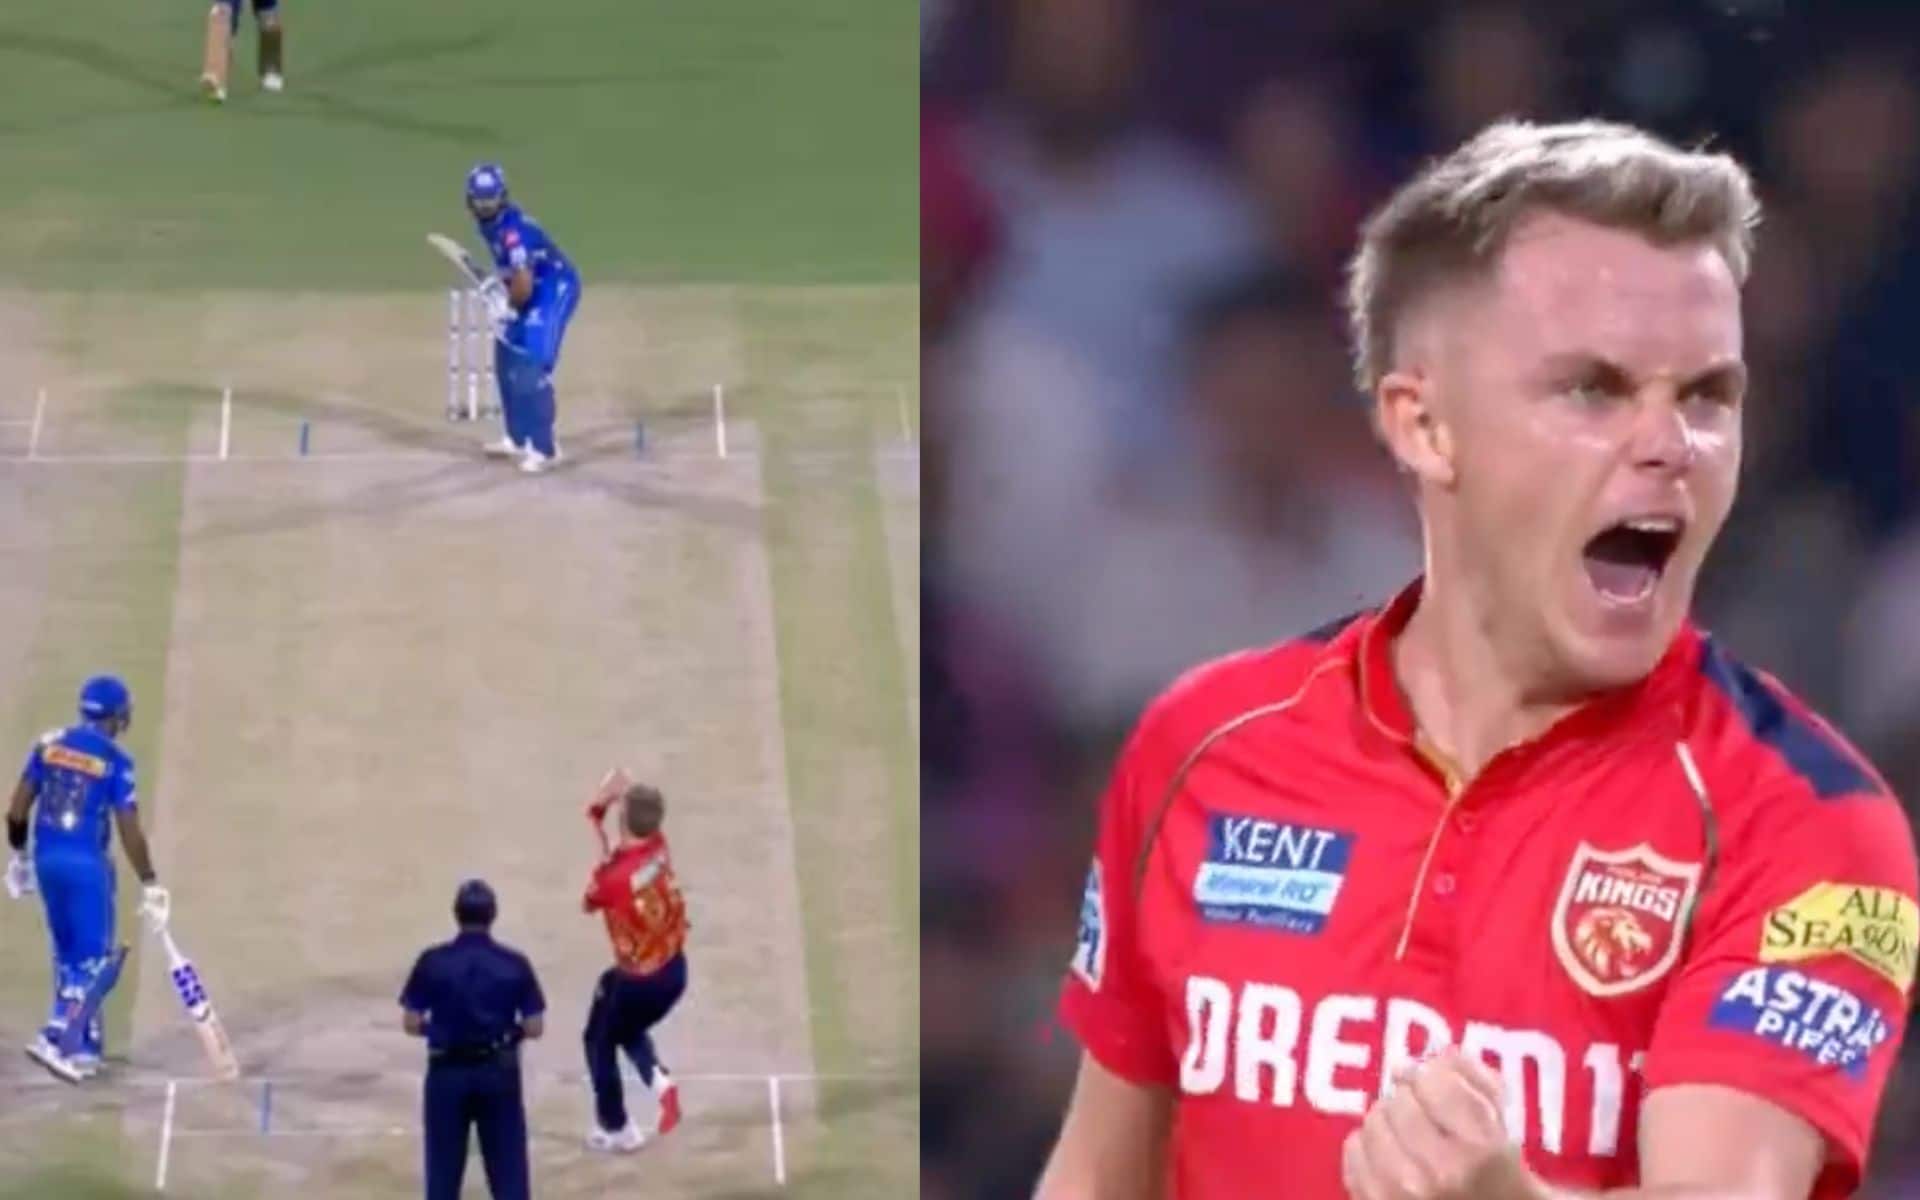 Sam Curran looked pretty pumped up after taking Rohit Sharma's wicket
